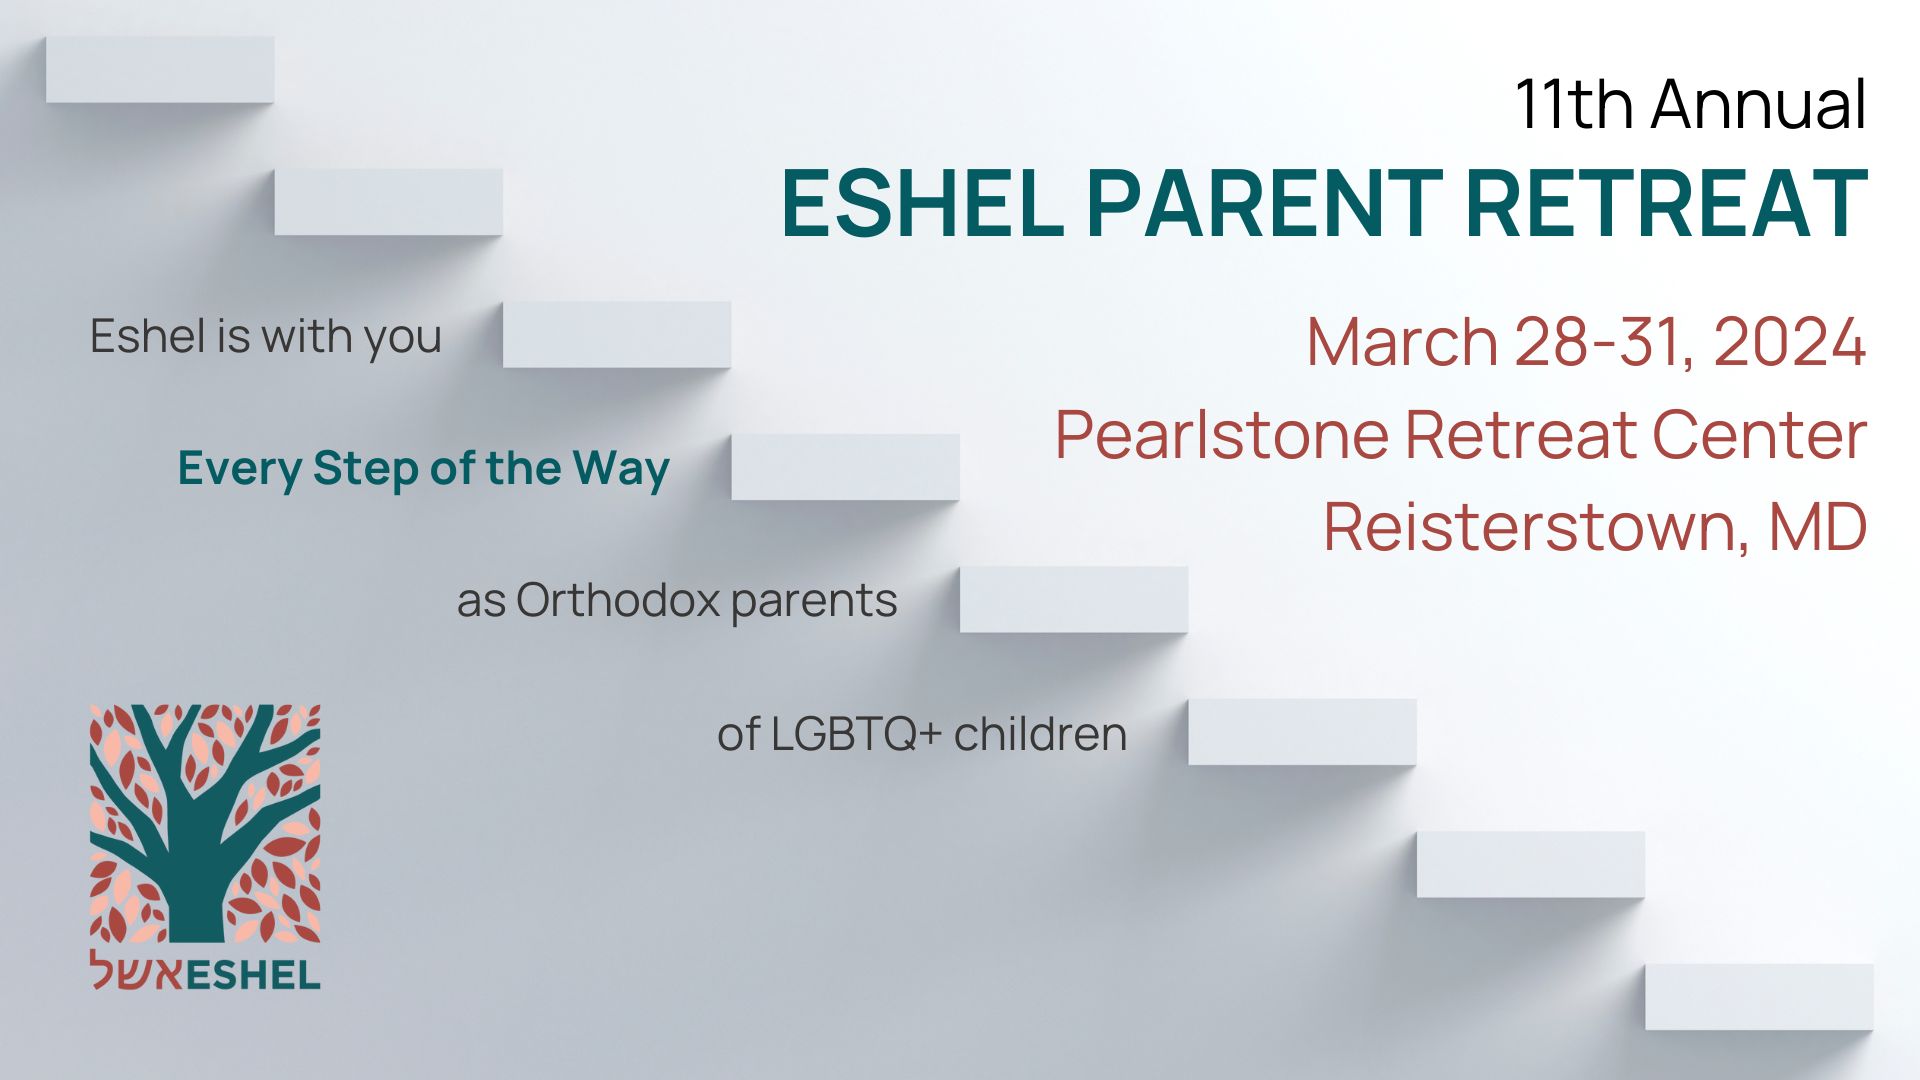 11th Annual Eshel Parent Retreat | March 28-31, 2024, Pearlstone Retreat Center, Reisesterstown, MD